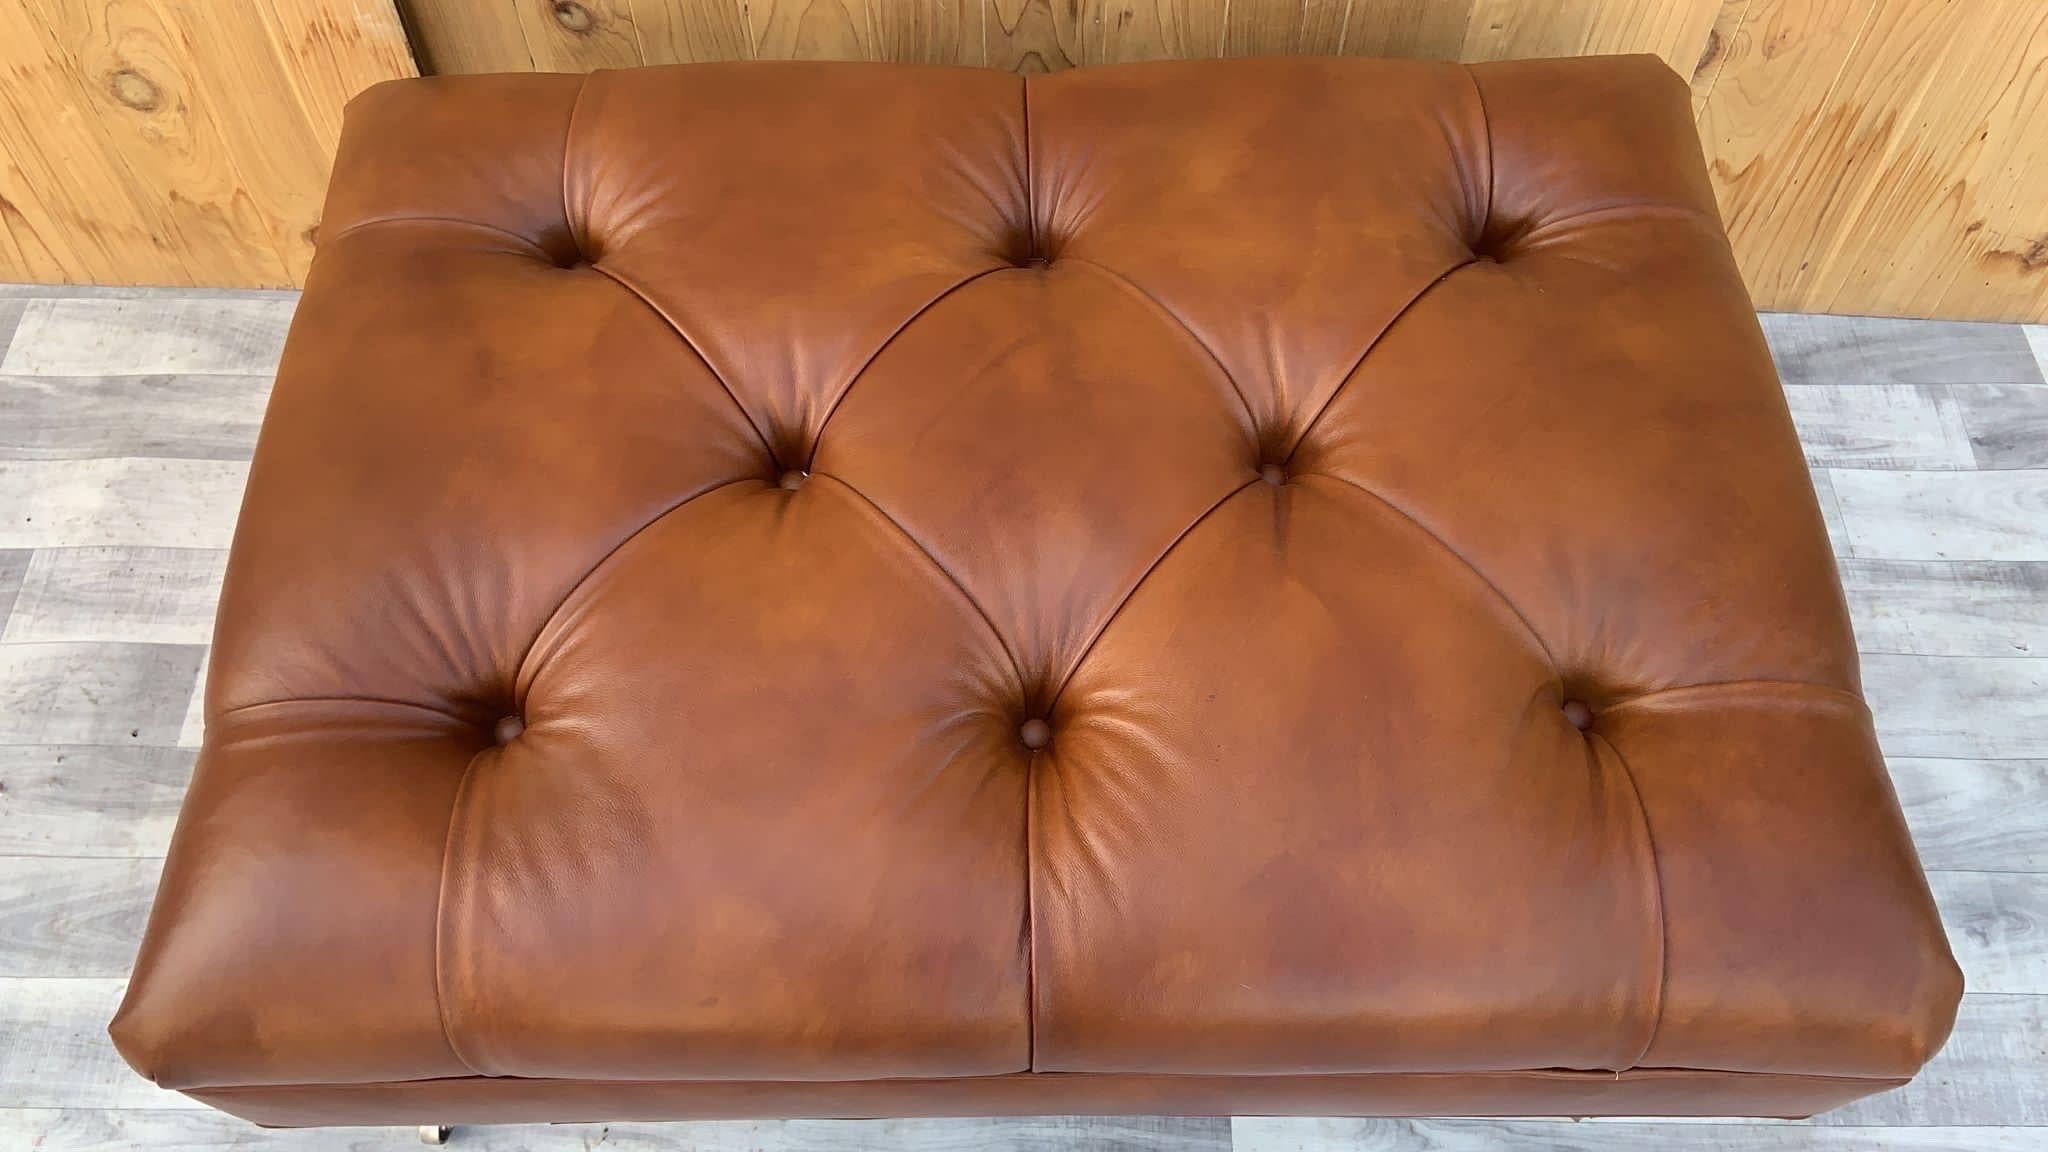 Vintage Chesterfield Style Leather Tufted Ottoman

Gorgeous vintage English Chesterfield style leather tufted ottoman. Can also be used as a coffee table. This beautiful piece has been newly upholstered in a high end, soft, full grain, Whiskey